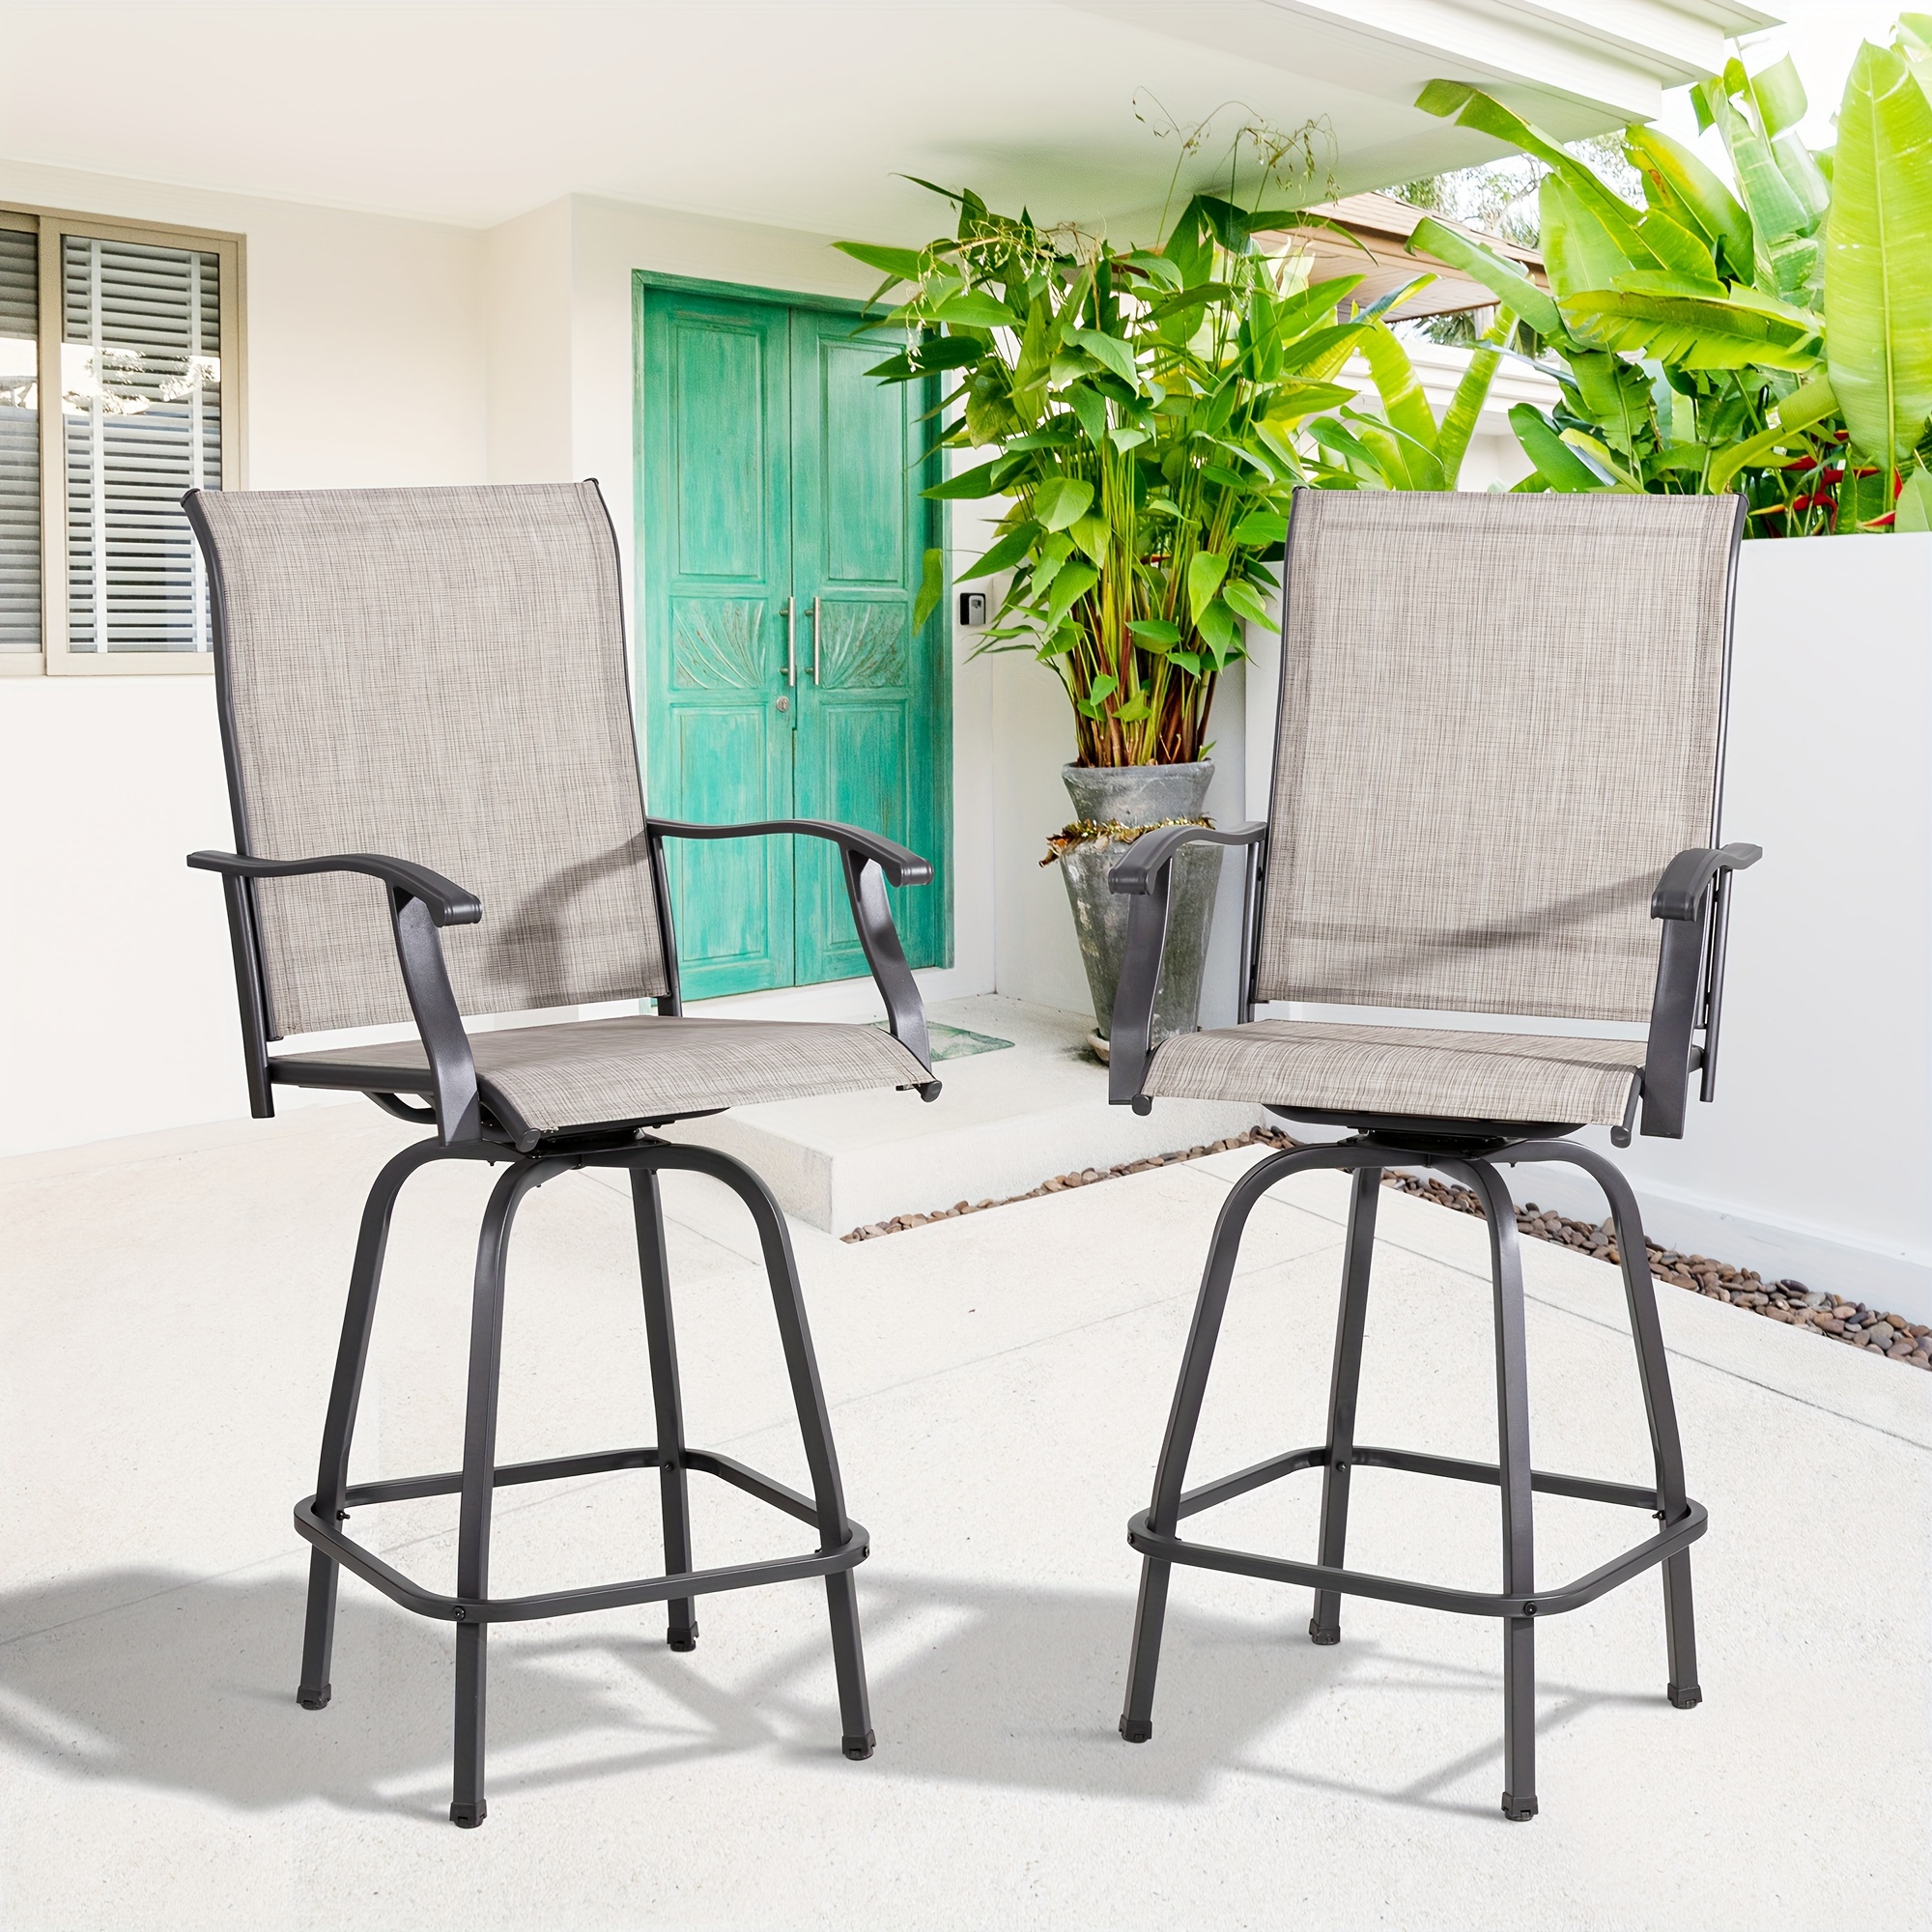 

Vongrasig 2 Piece Patio Swivel Bar Chairs, All Weather Metal Textile High Swivel Bar Stools Chairs, Outdoor High Top Bistro Set For Backyard, Lawn Garden, Balcony, Taupe